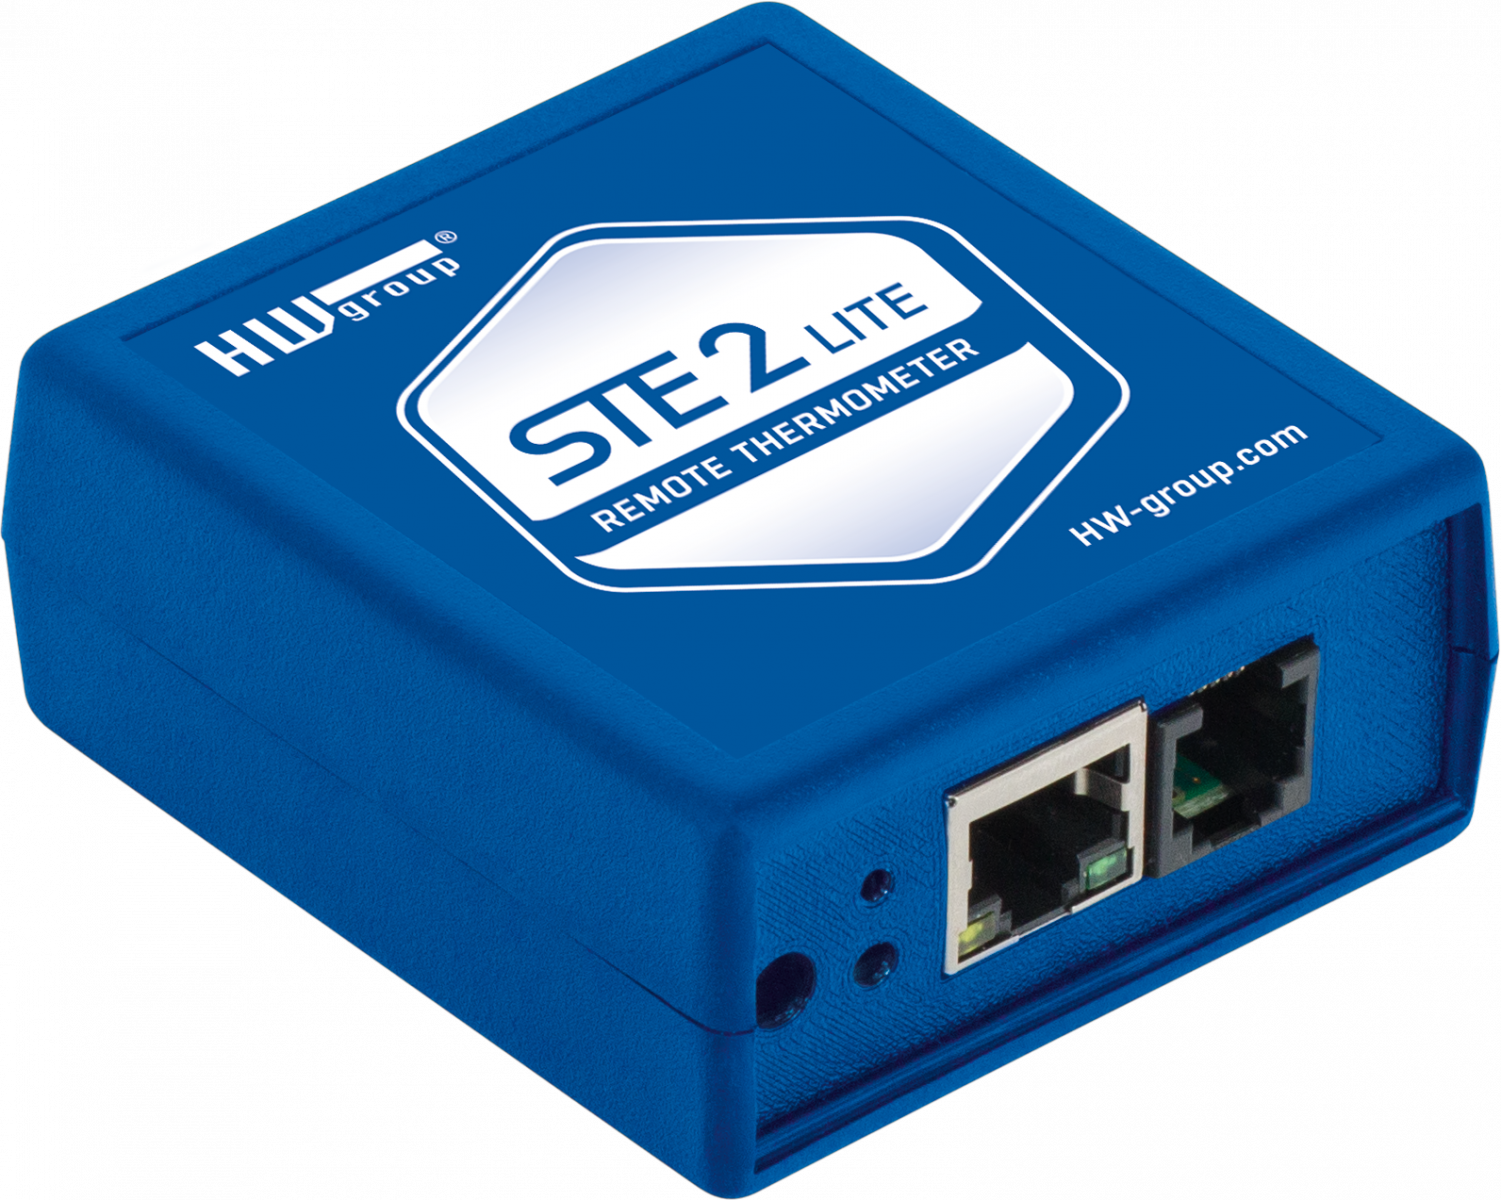 Monitor Temperature at Remote Locations with new STE2 LITE